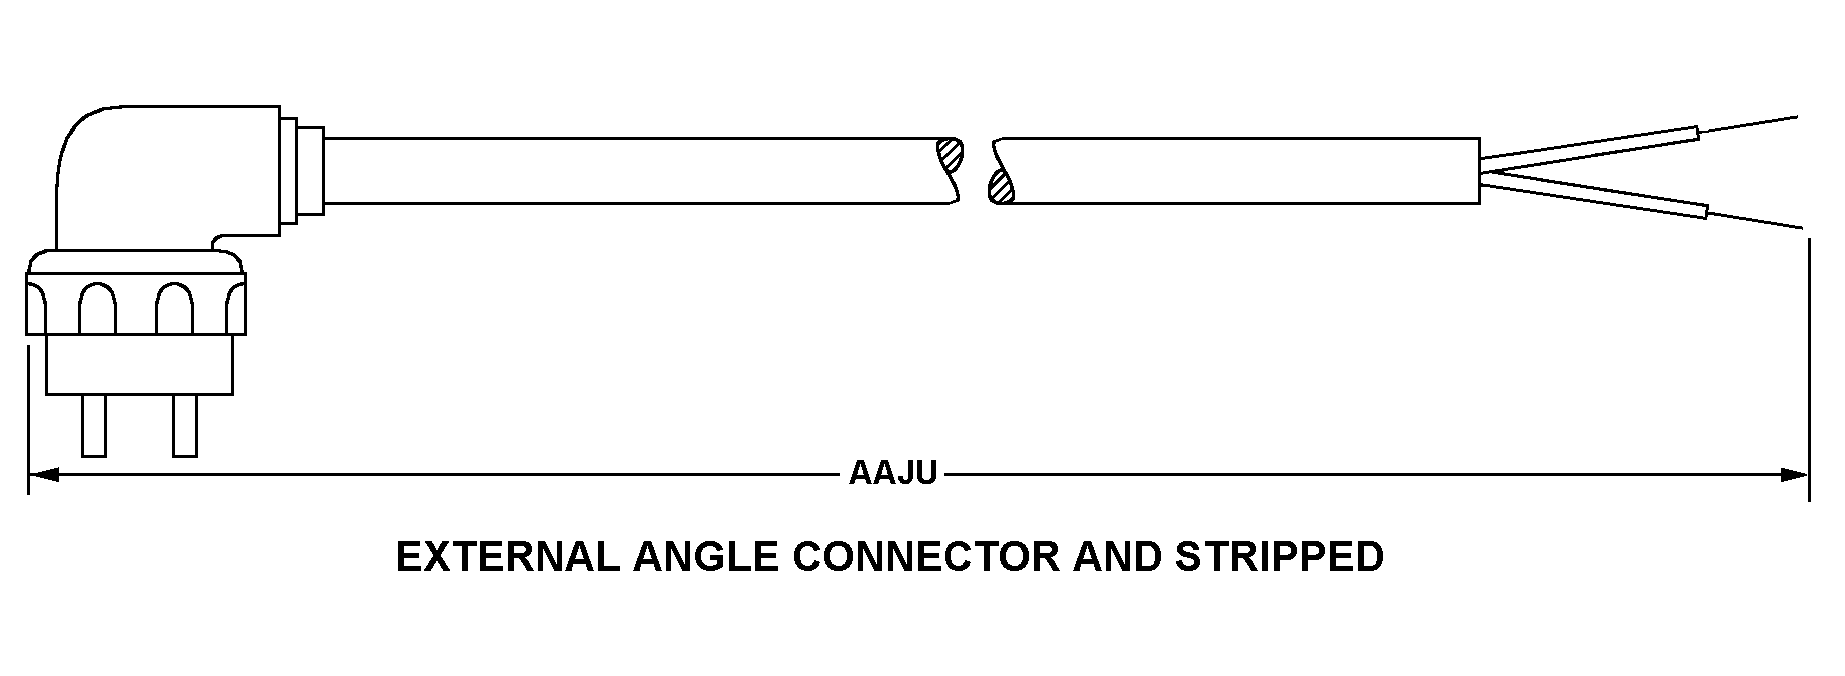 EXTERNAL ANGLE CONNECTOR AND STRIPPED style nsn 5995-01-539-1021